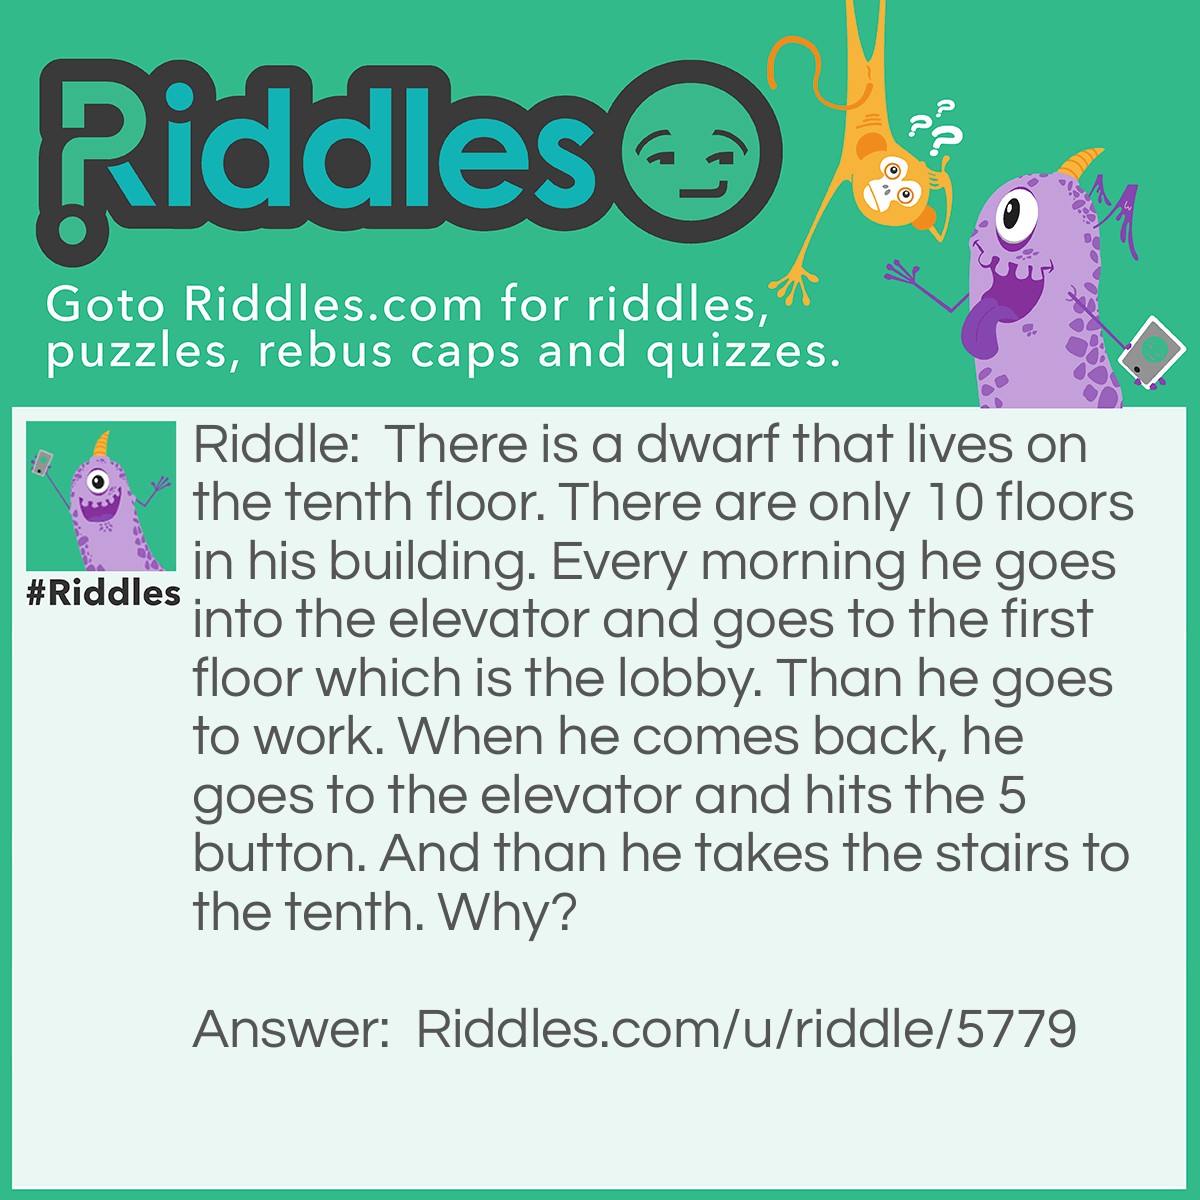 Riddle: There is a dwarf that lives on the tenth floor. There are only 10 floors in his building. Every morning he goes into the elevator and goes to the first floor which is the lobby. Than he goes to work. When he comes back, he goes to the elevator and hits the 5 button. And than he takes the stairs to the tenth. Why? Answer: He is a dwarf so he can’t reach the tenth button.